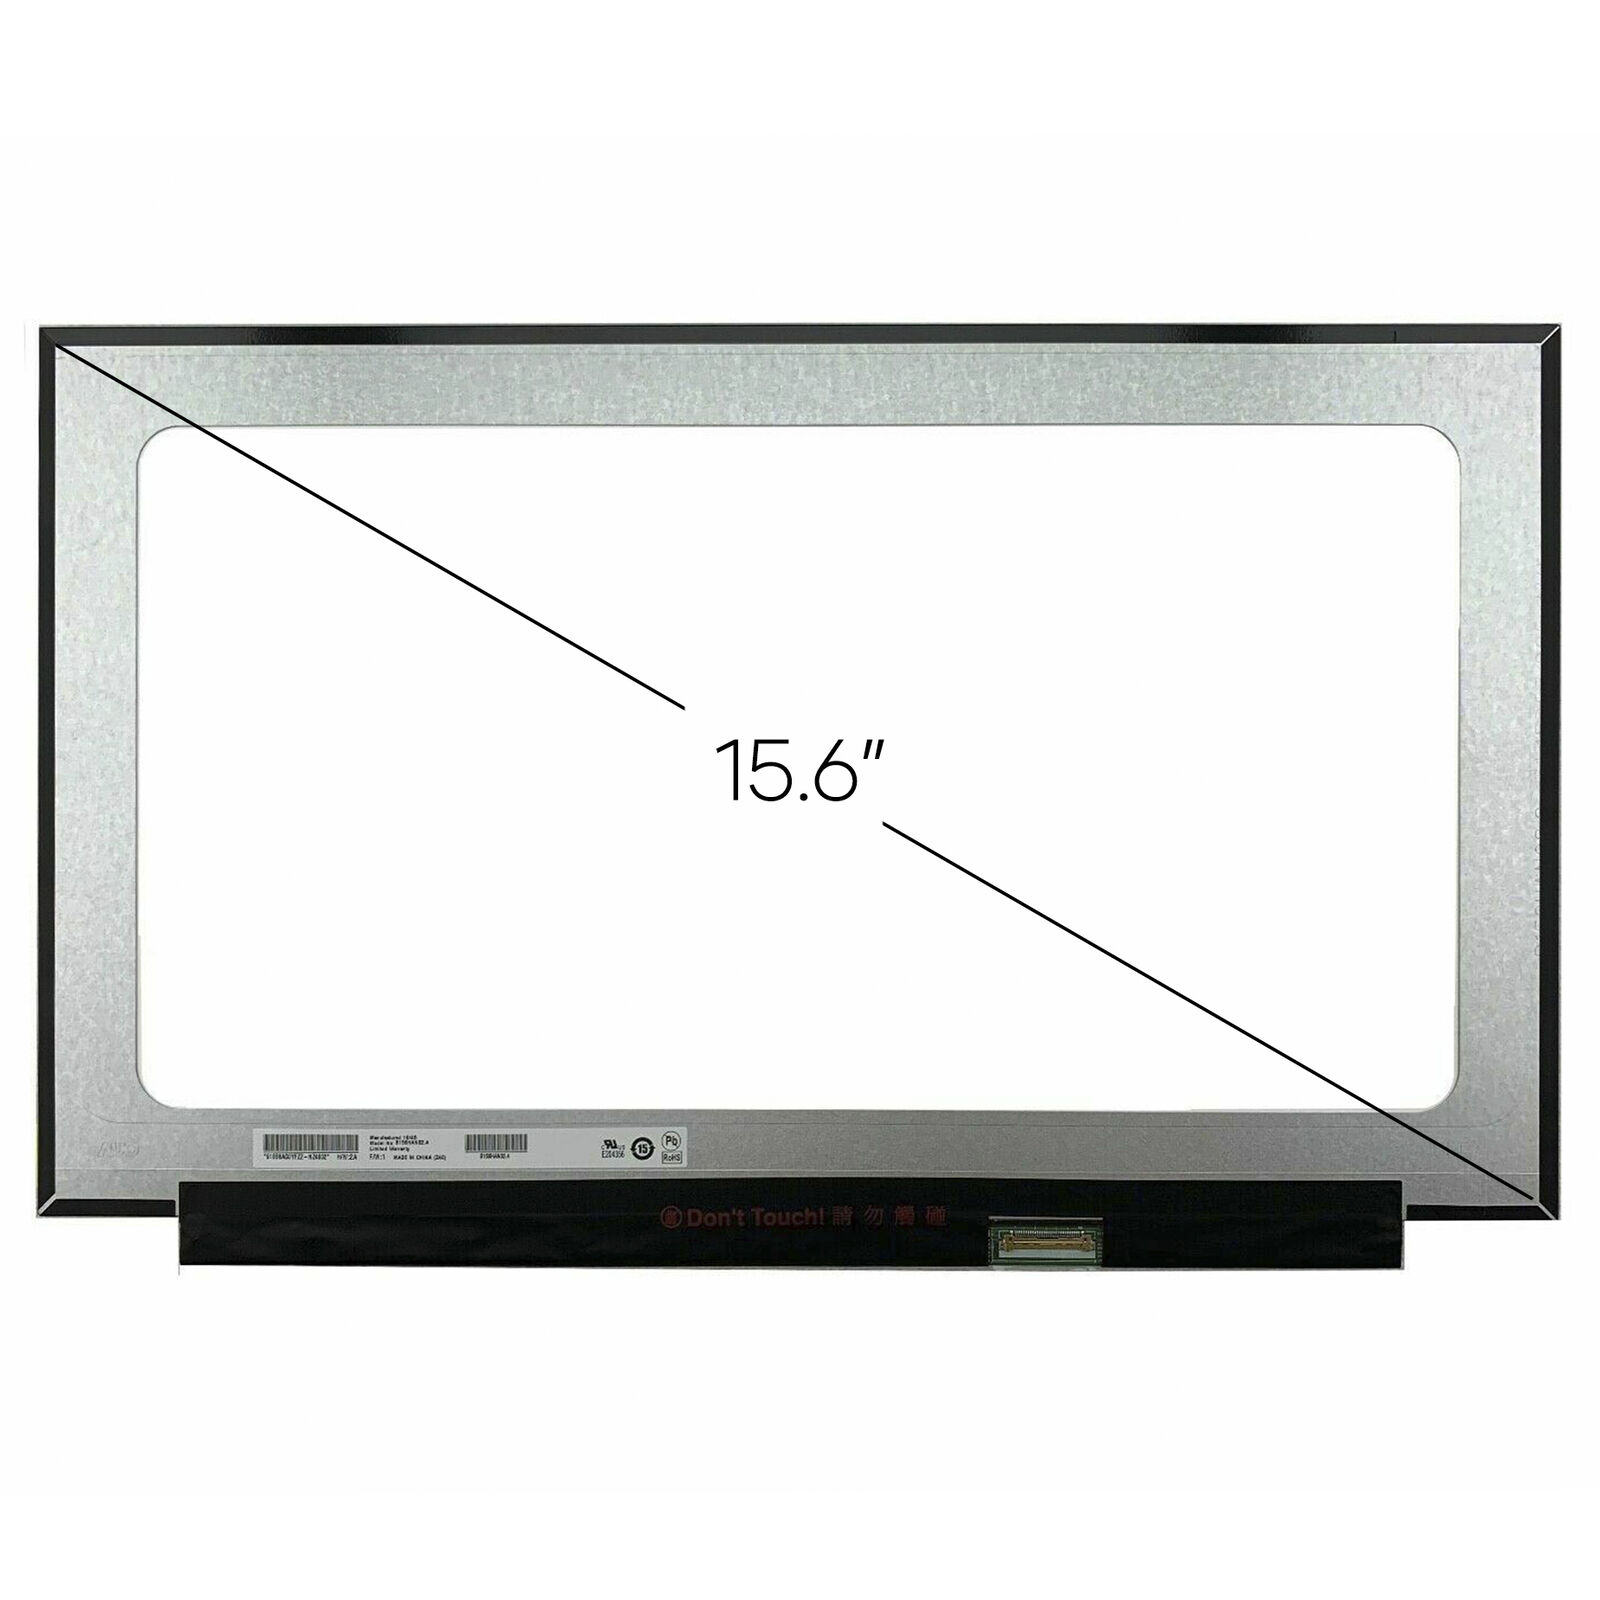 Screen Replacement for B156HAN02.1 FHD 1920x1080 IPS Glossy LCD LED Display